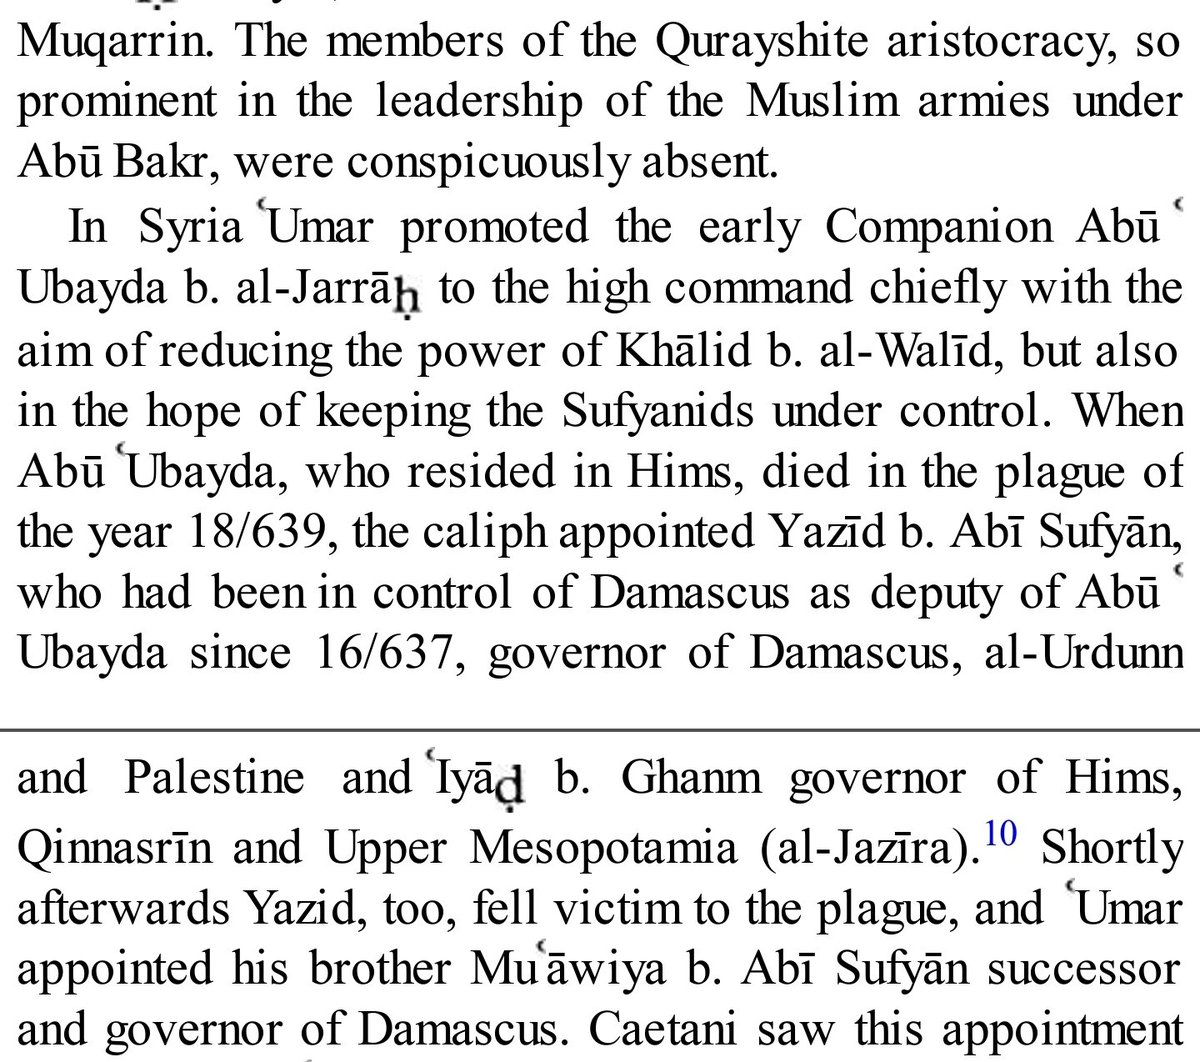 Abu Bakr only ruled for two years. Meaning that not much had changed in the domestic sociopolitical climate. Meaning, Umar did not rule differently from his predecessor b/c of circumstances but, b/c he had objections. Are they not both Rightly Guided? Then why the disparity?